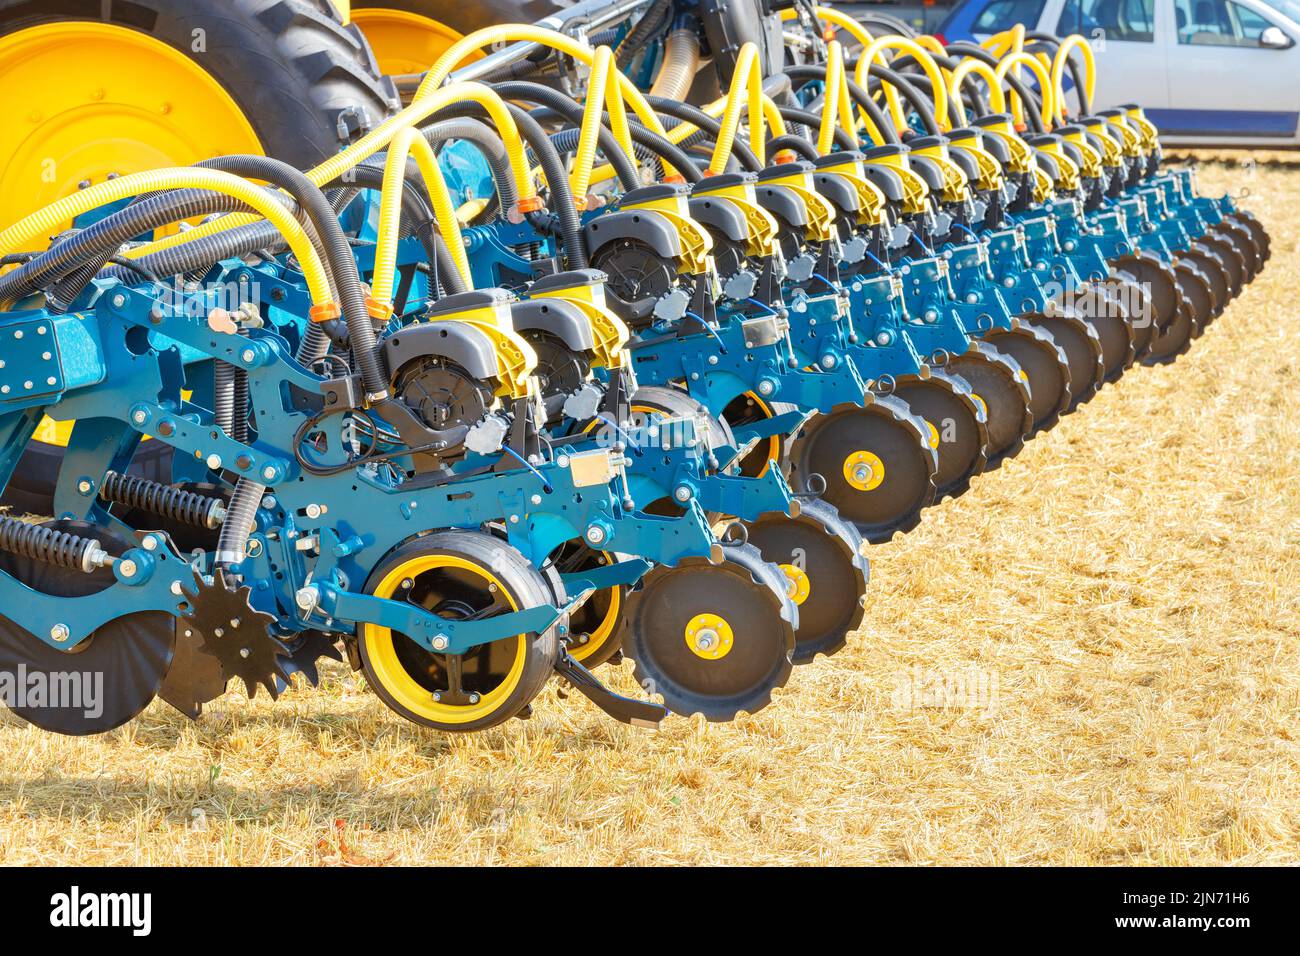 Multi row seeder with a pneumatic mechanism for even distribution and sowing of seeds against the backdrop of an agricultural field on a sunny day. Stock Photo